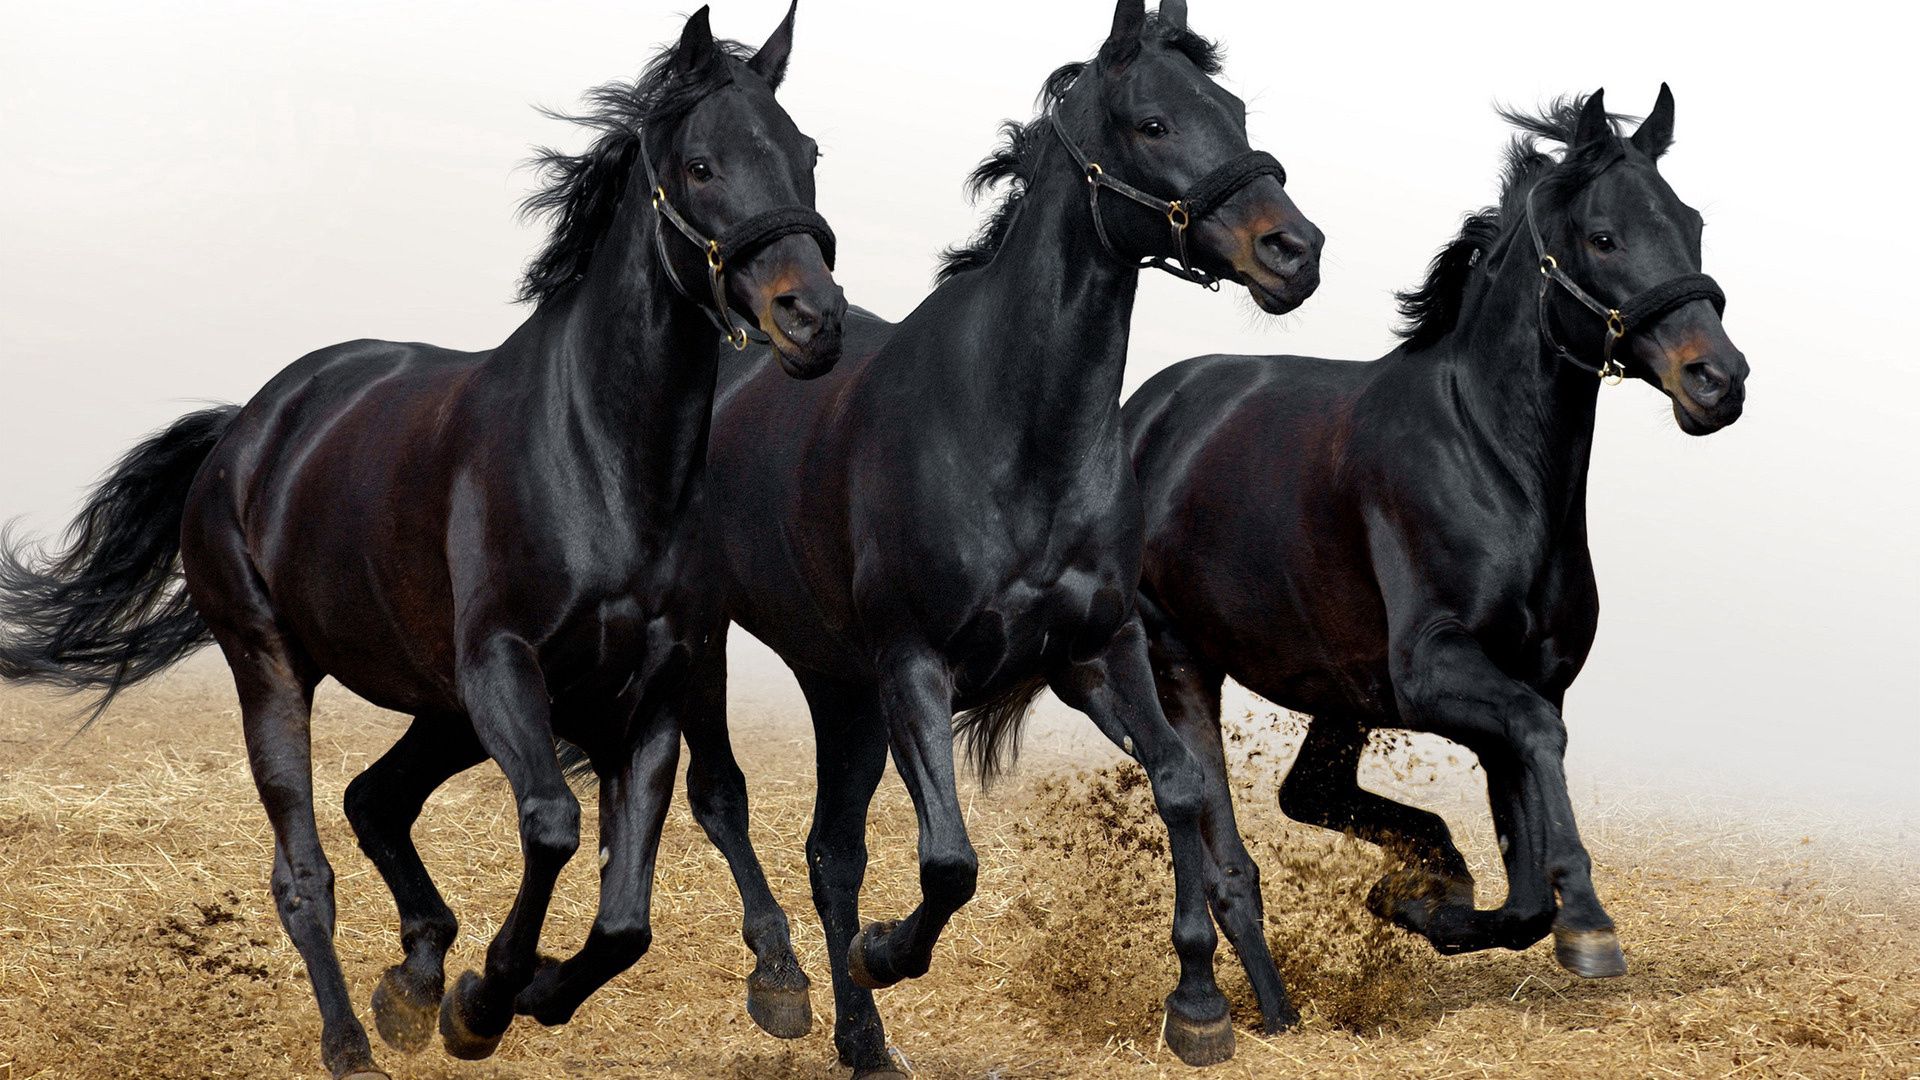 137760 download wallpaper animals, horses, head, three, run away, run screensavers and pictures for free